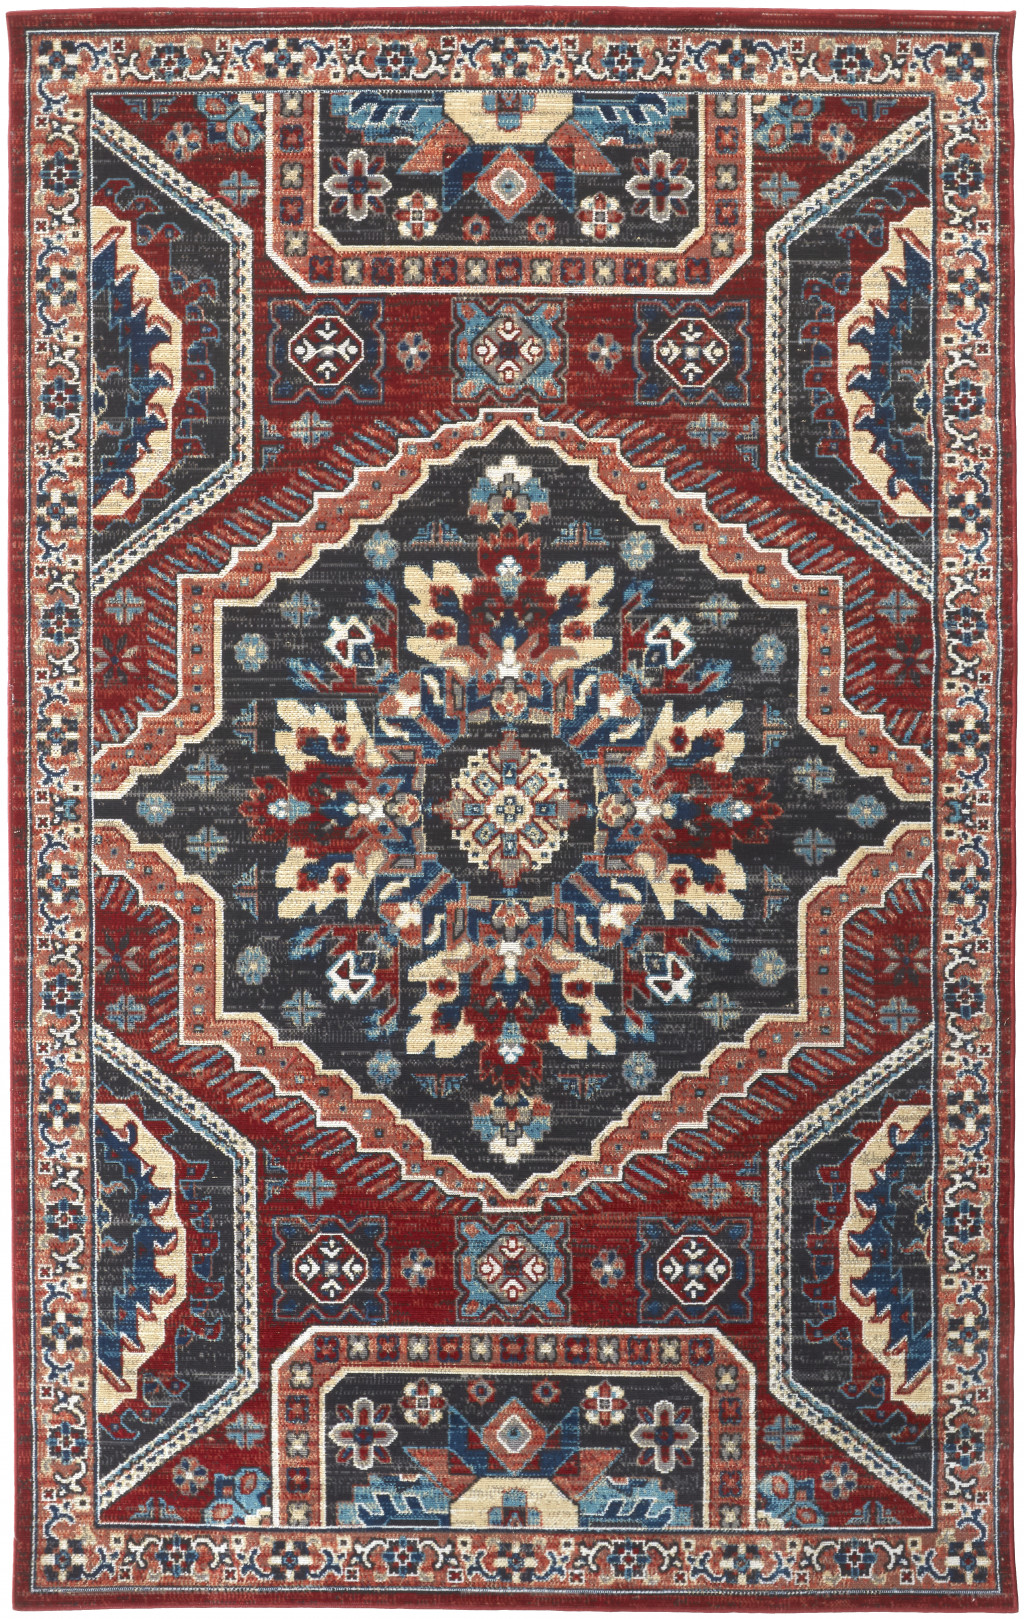 7' X 10' Red Gray And Tan Abstract Power Loom Distressed Stain Resistant Area Rug-514675-1